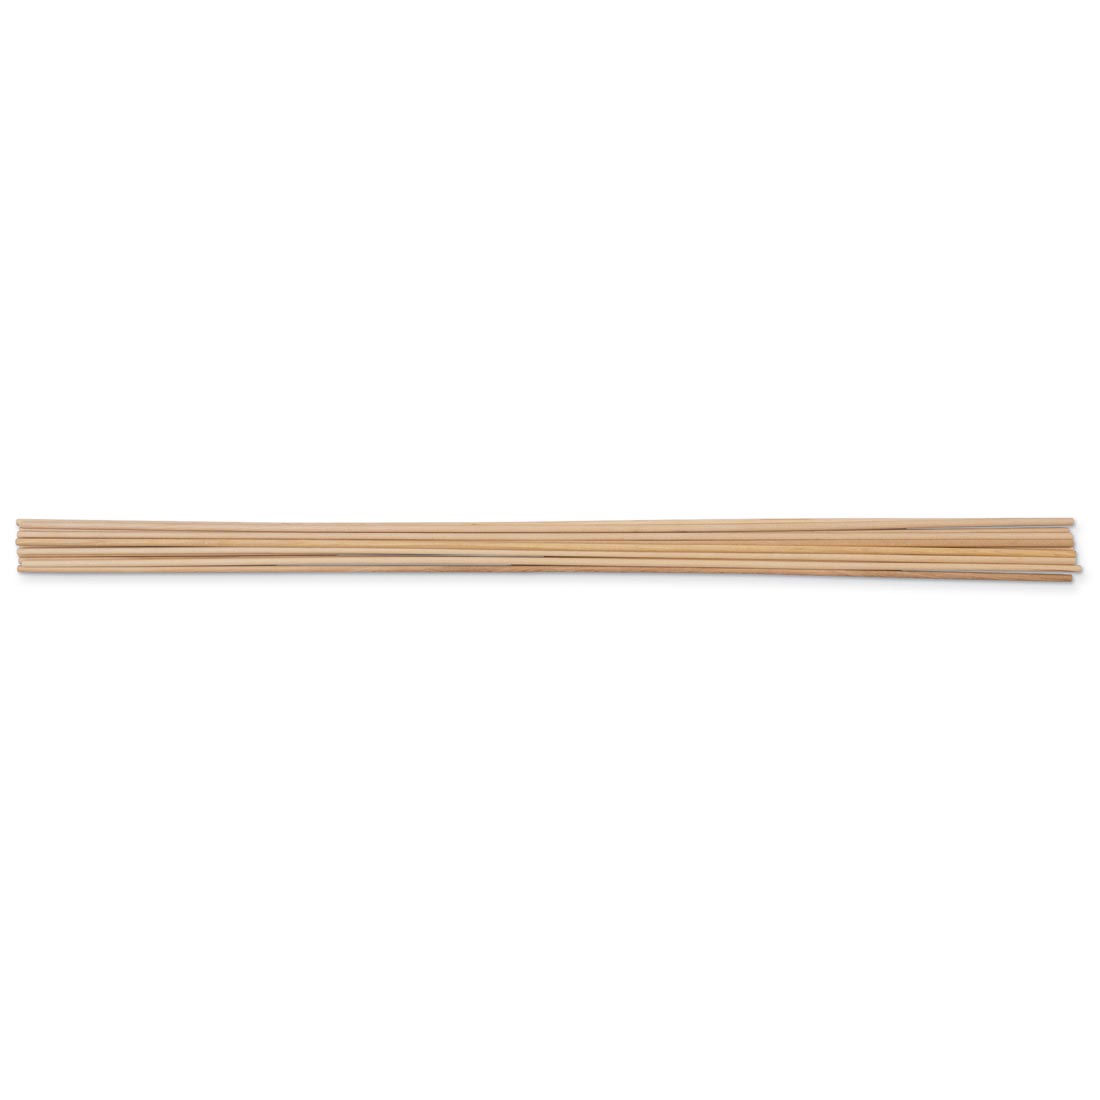 Creativity Street 36" long by 1/4" Diameter natural Wooden Dowels, 12-count